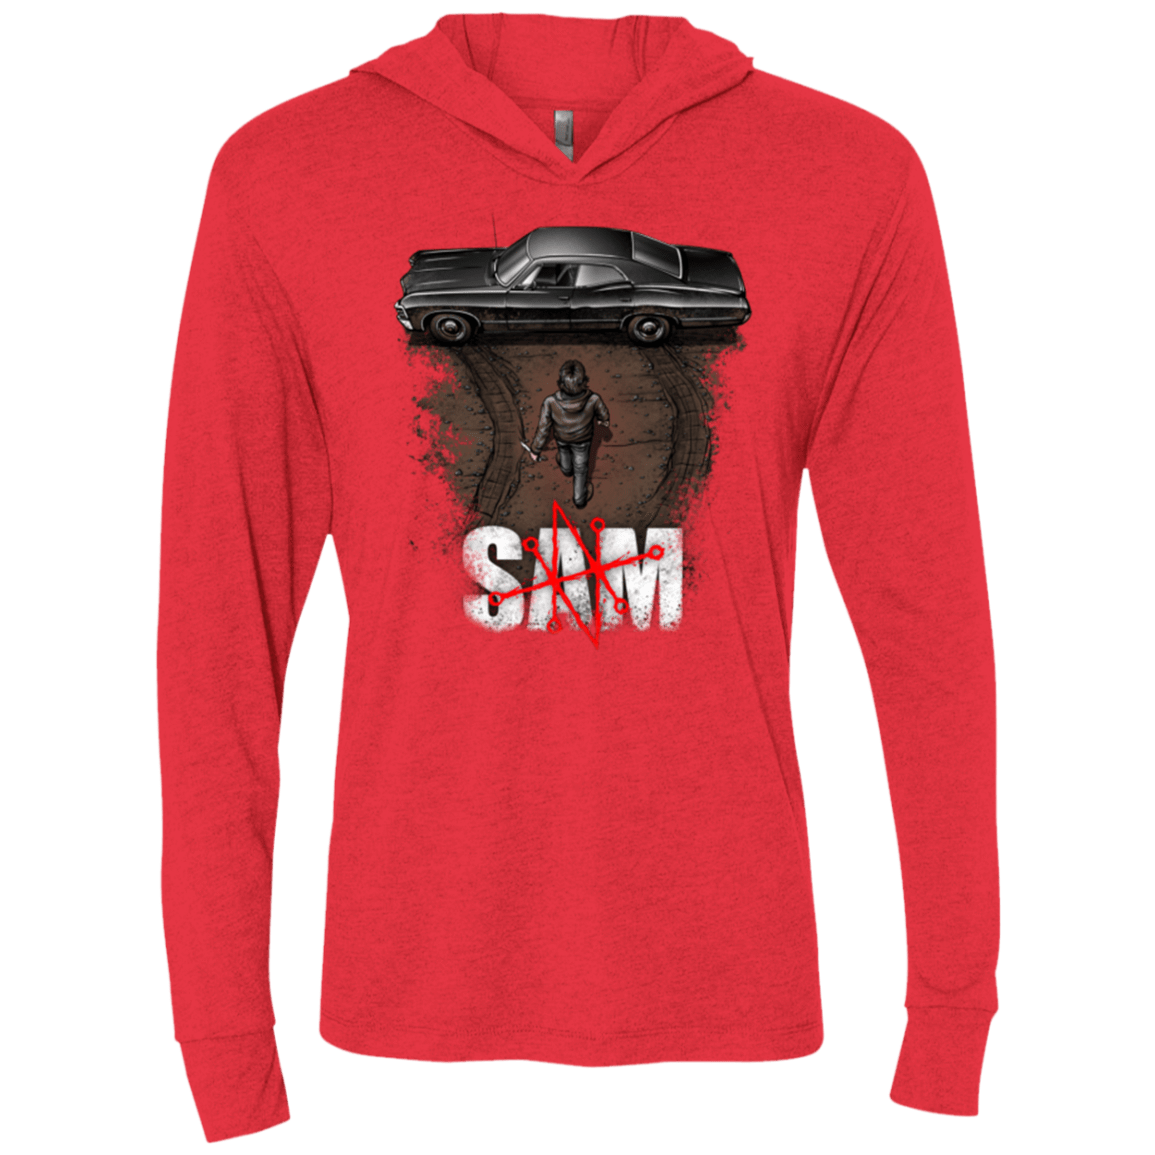 T-Shirts Vintage Red / X-Small Sam Triblend Long Sleeve Hoodie Tee